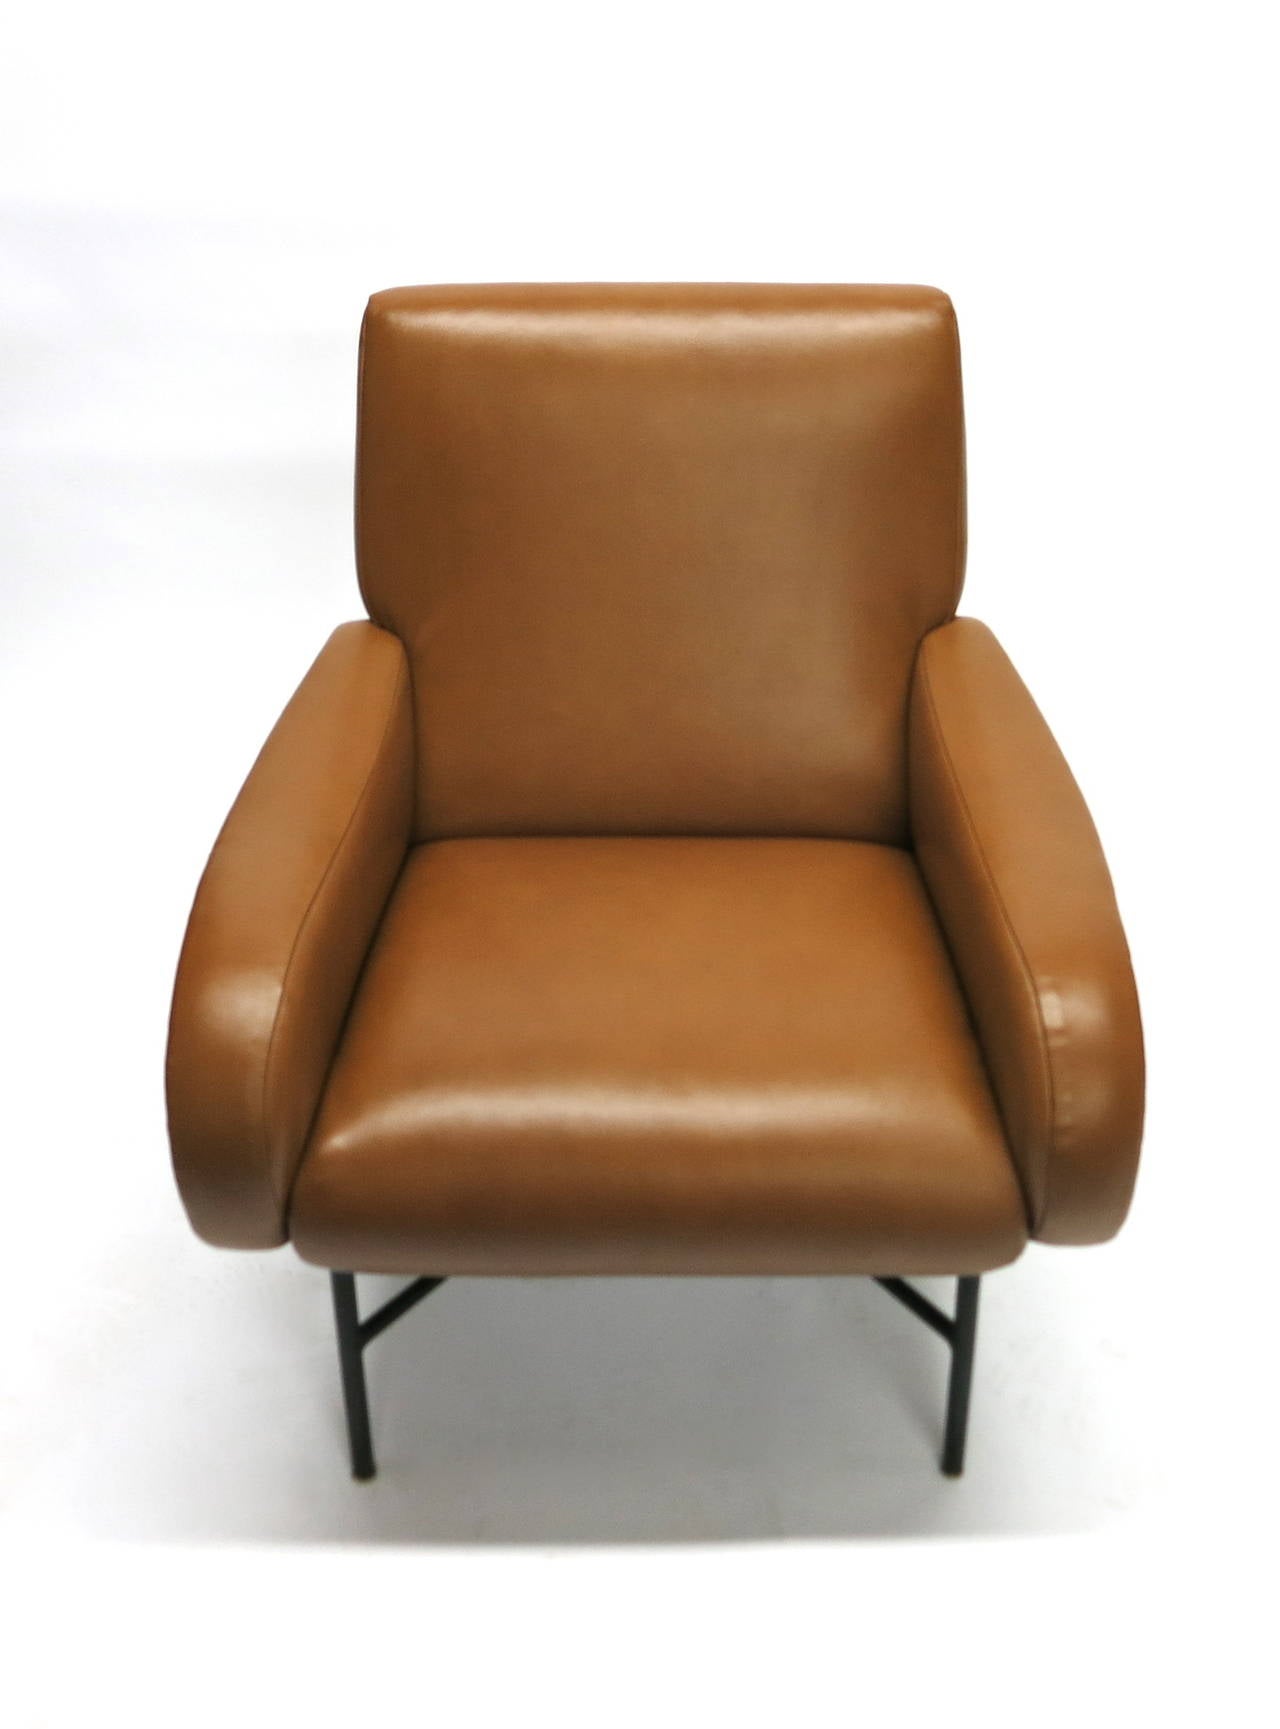 Lounge chair has been covered in brown leather with arms seat and back that closely resembles Marco Zanuso Lady's chair. The base has four legs an X stretcher in black enameled steel.